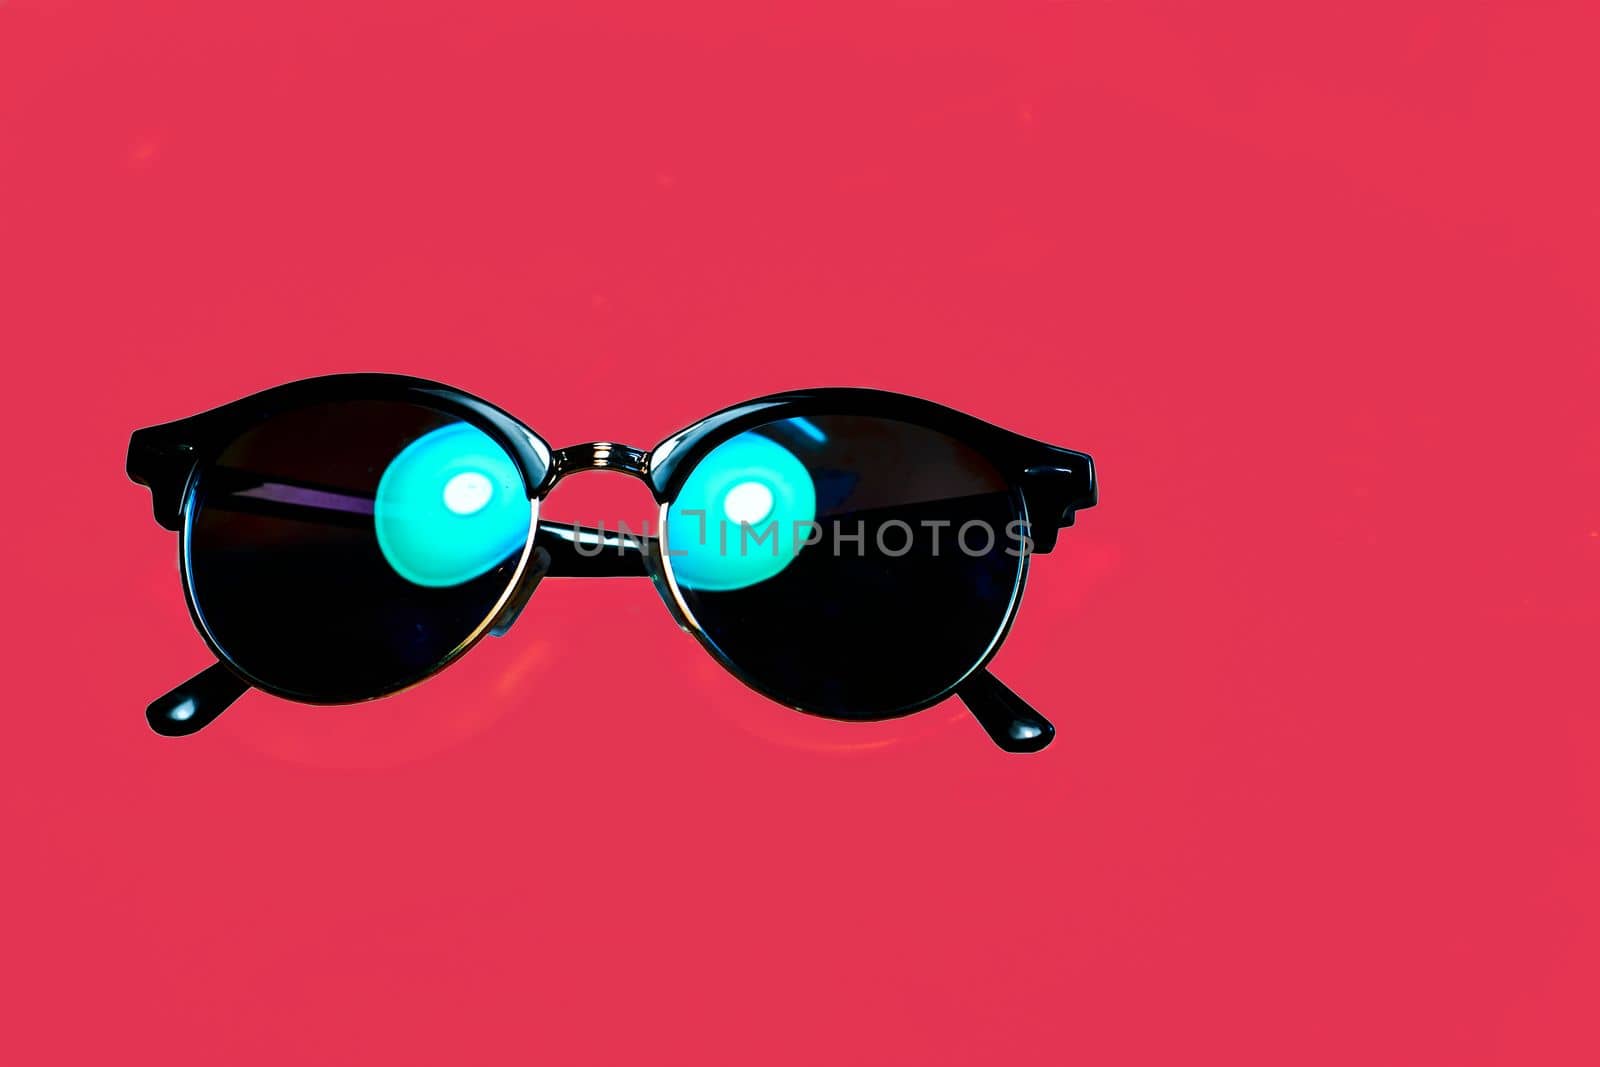 glasses tinted to protect the eyes from sunlight or glare. Black sunglasses with emerald highlights on a red background